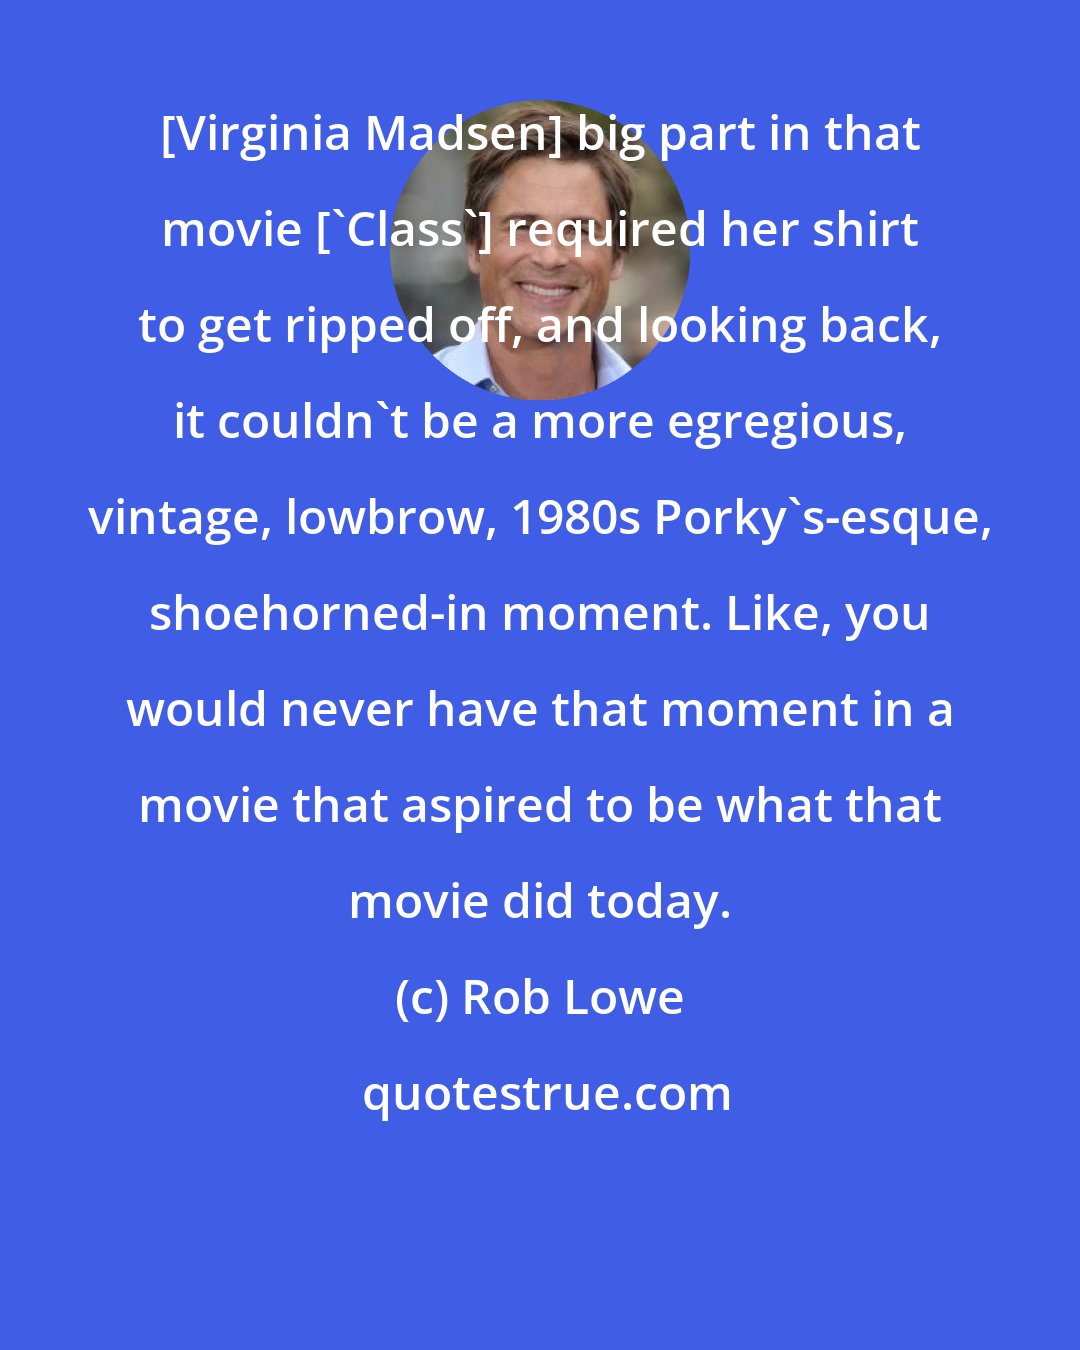 Rob Lowe: [Virginia Madsen] big part in that movie ['Class'] required her shirt to get ripped off, and looking back, it couldn't be a more egregious, vintage, lowbrow, 1980s Porky's-esque, shoehorned-in moment. Like, you would never have that moment in a movie that aspired to be what that movie did today.